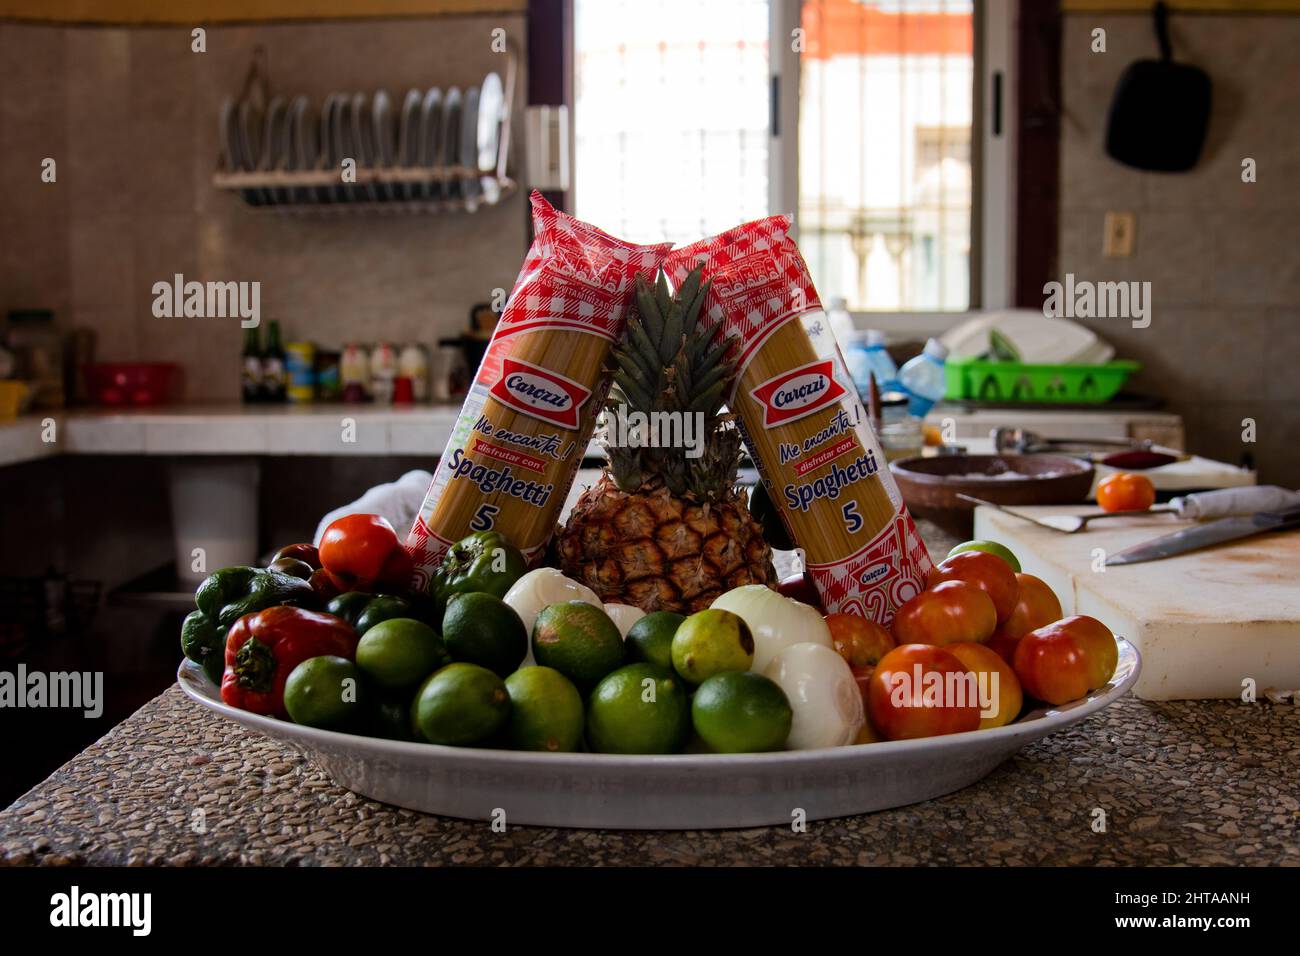 Bowl of fresh colorful fruits and spaghetti in a kitchen at a restaurant in Havana, Cuba. Stock Photo